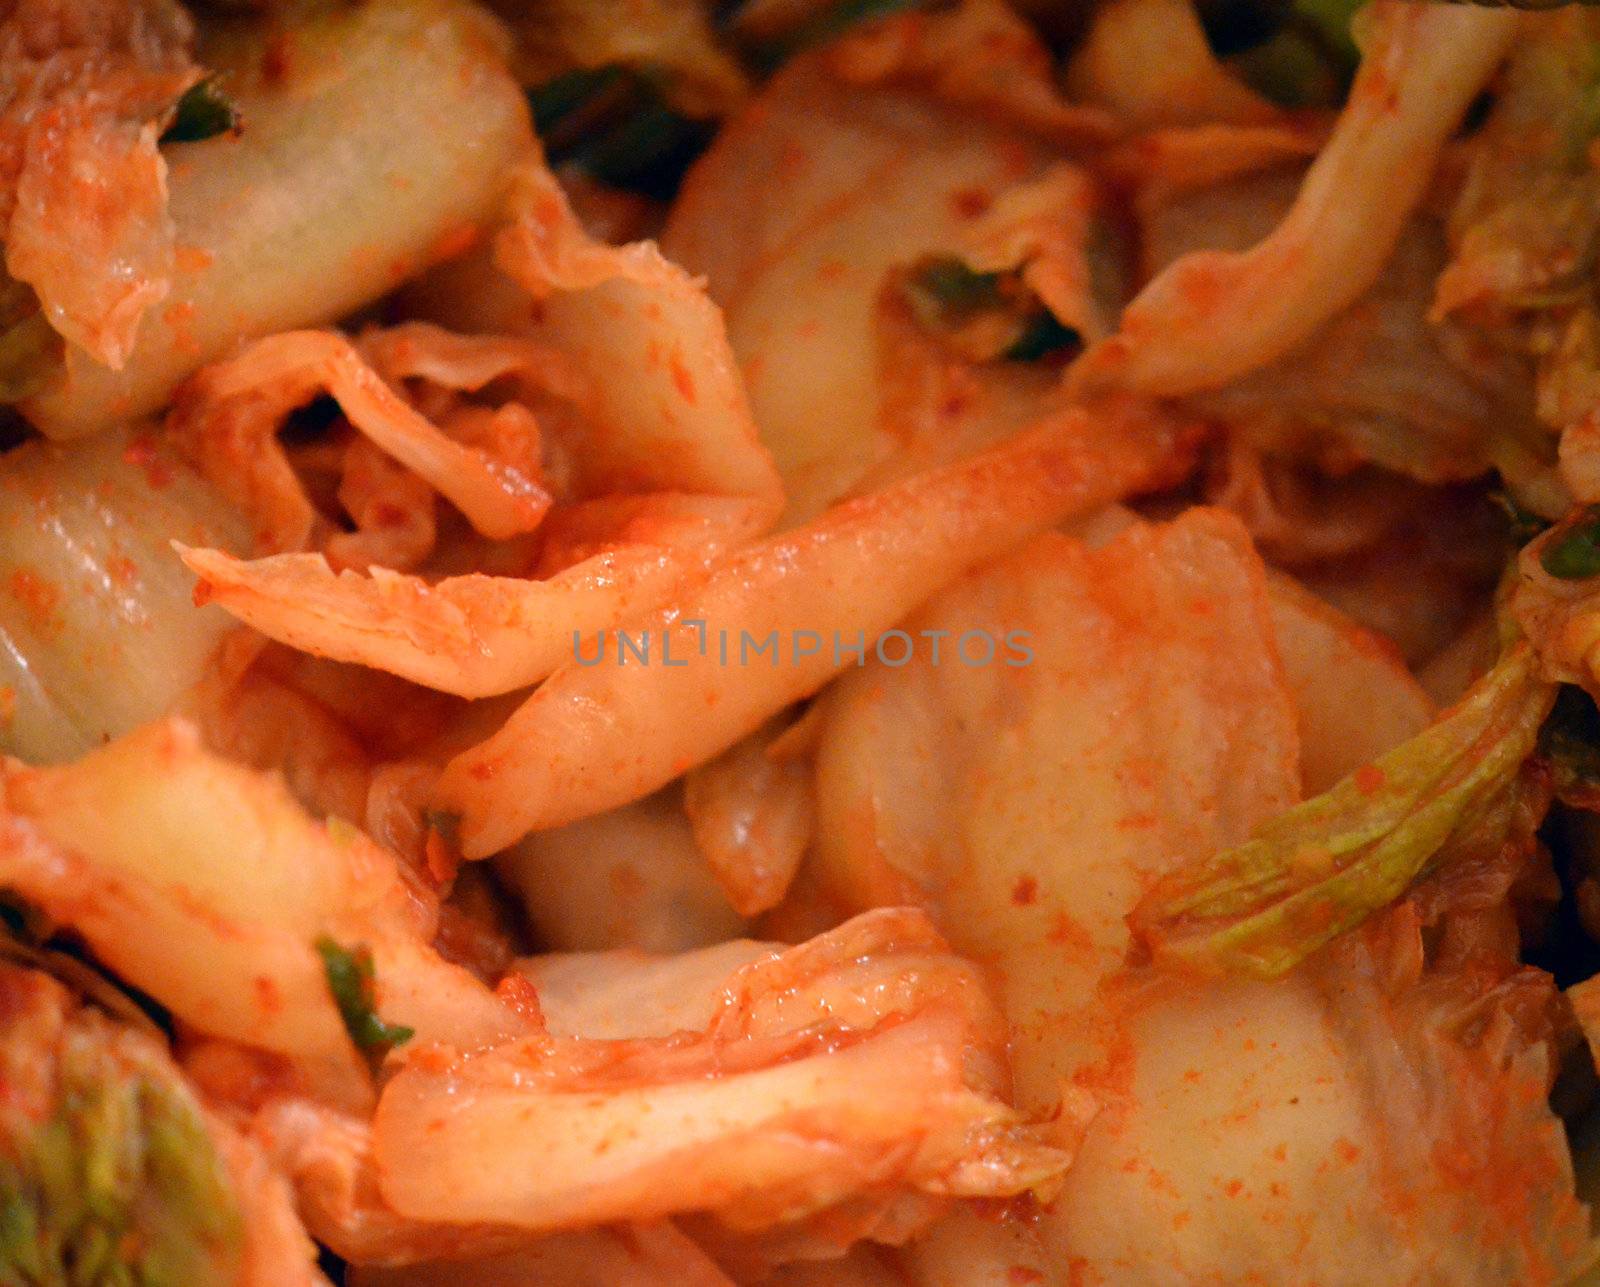 This is a plate of kimchi, a Korean food.